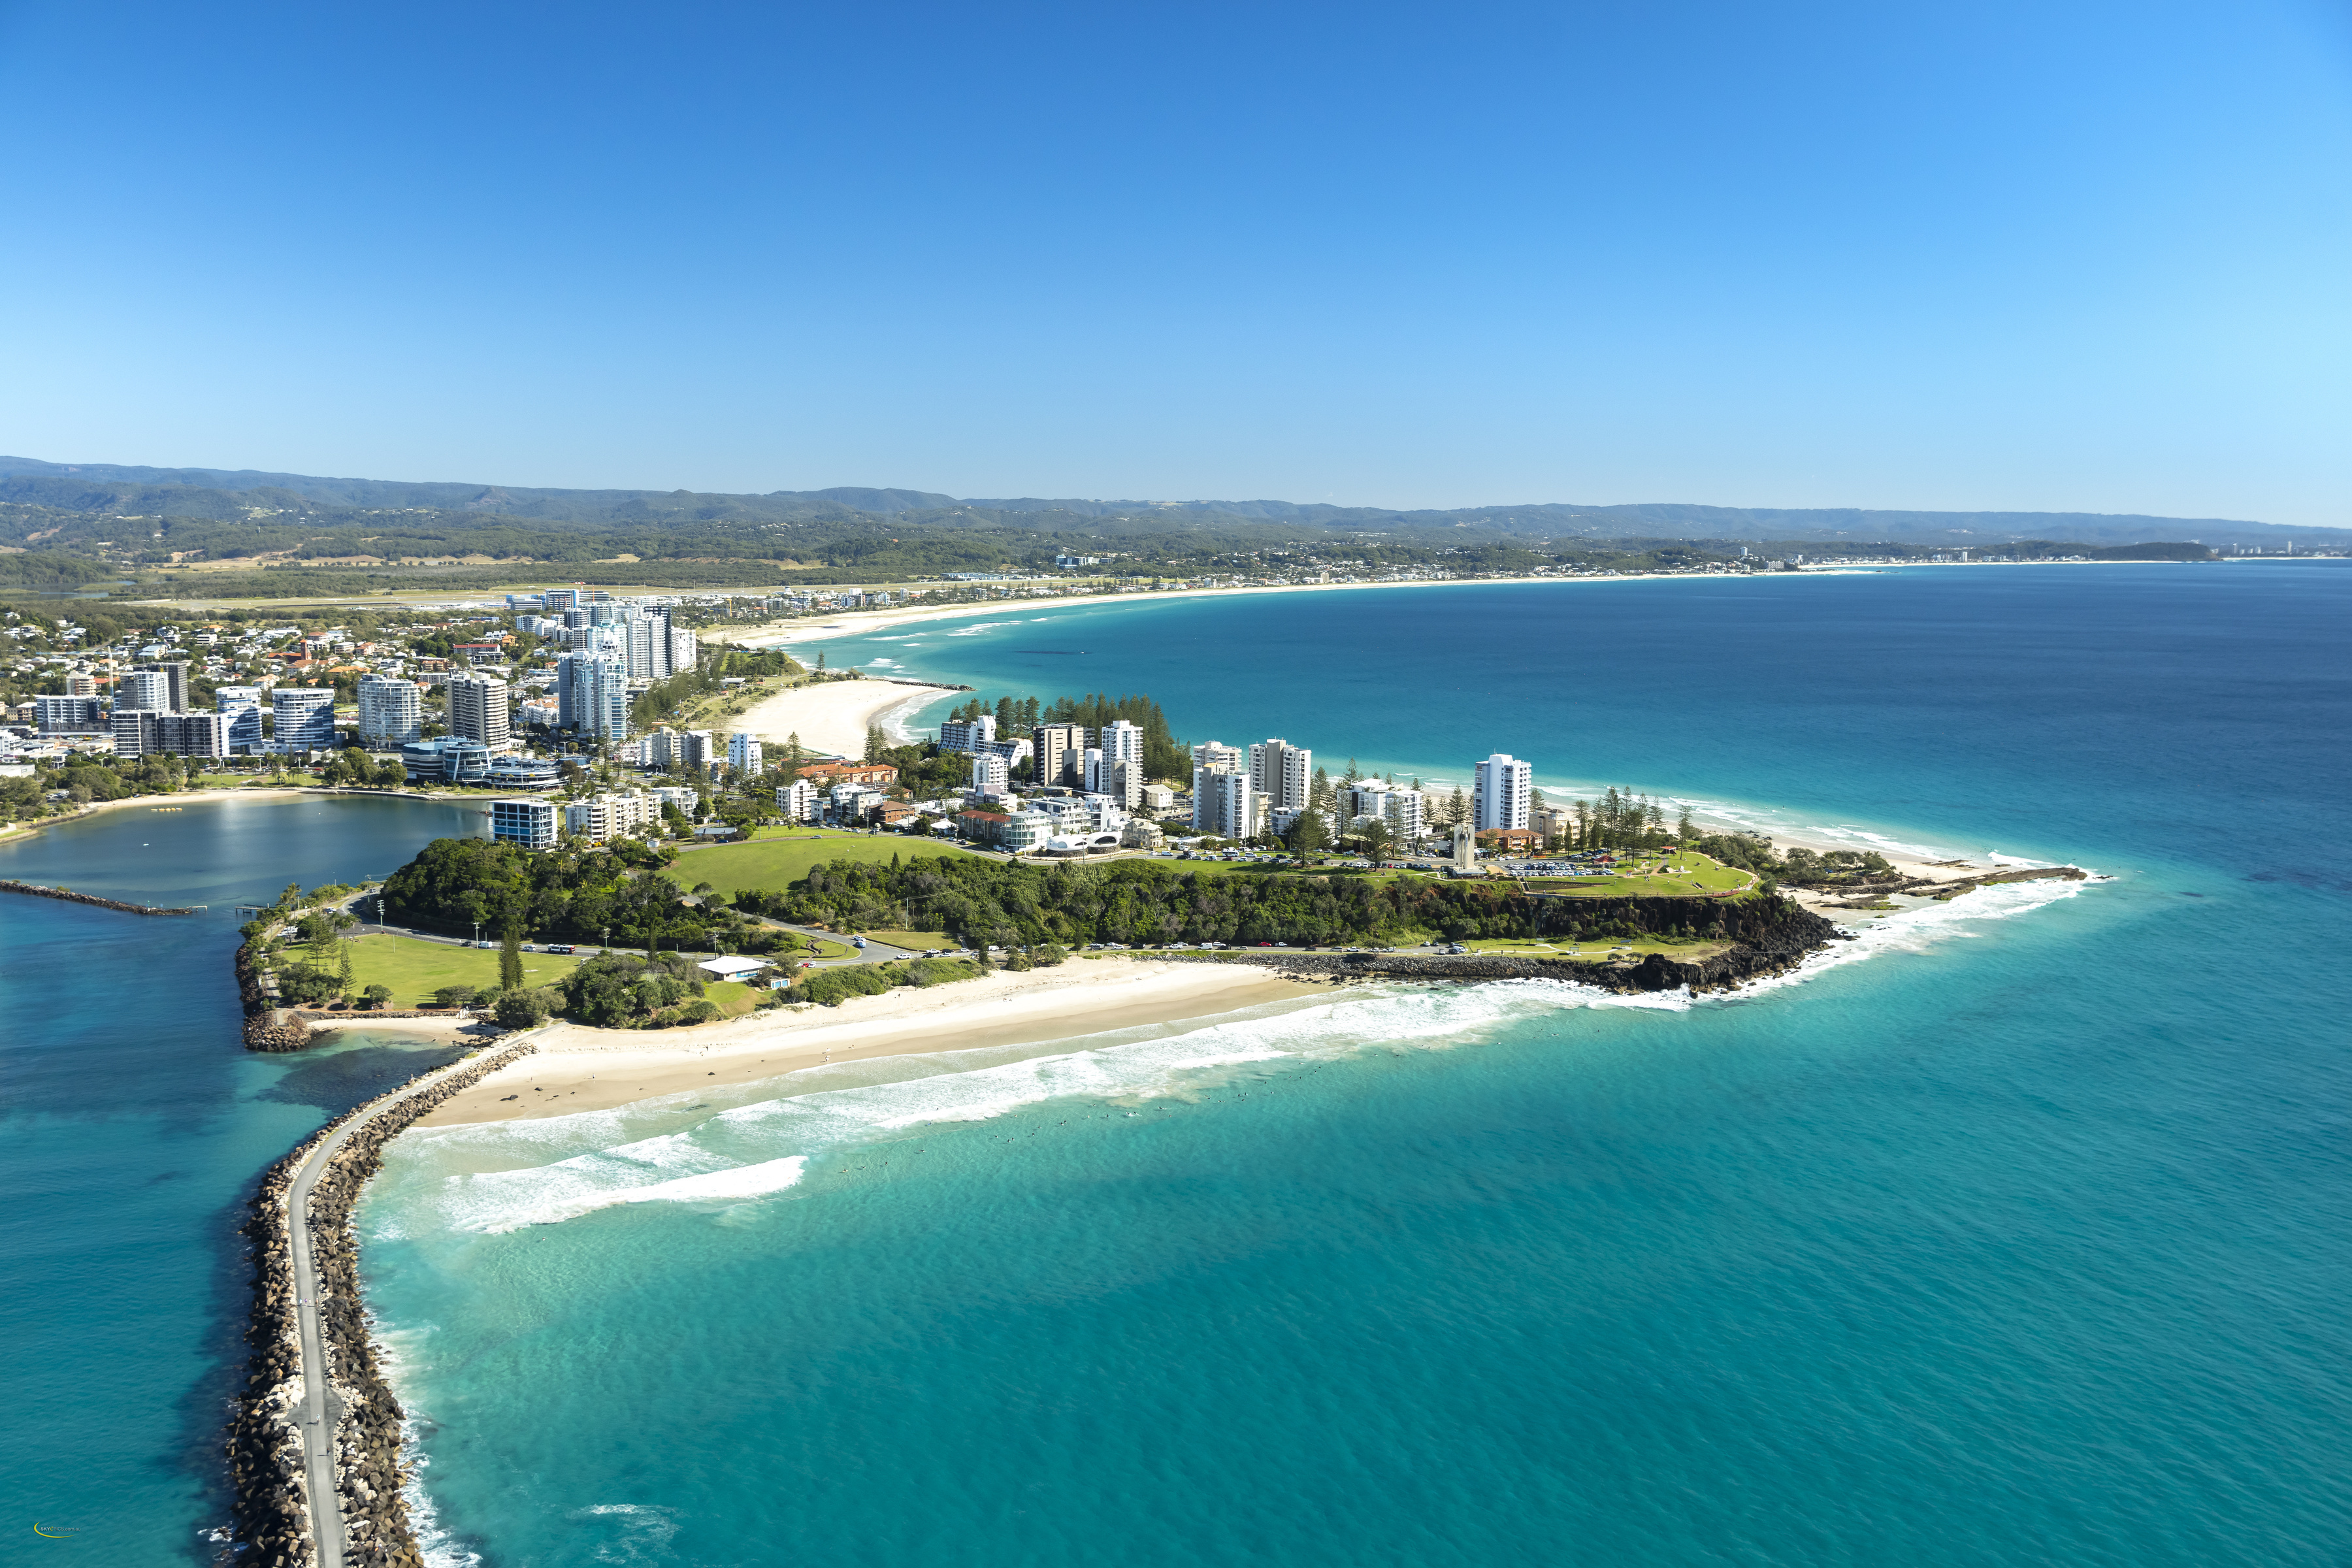 The Gold Coast's most southerly point, and its best development site yet